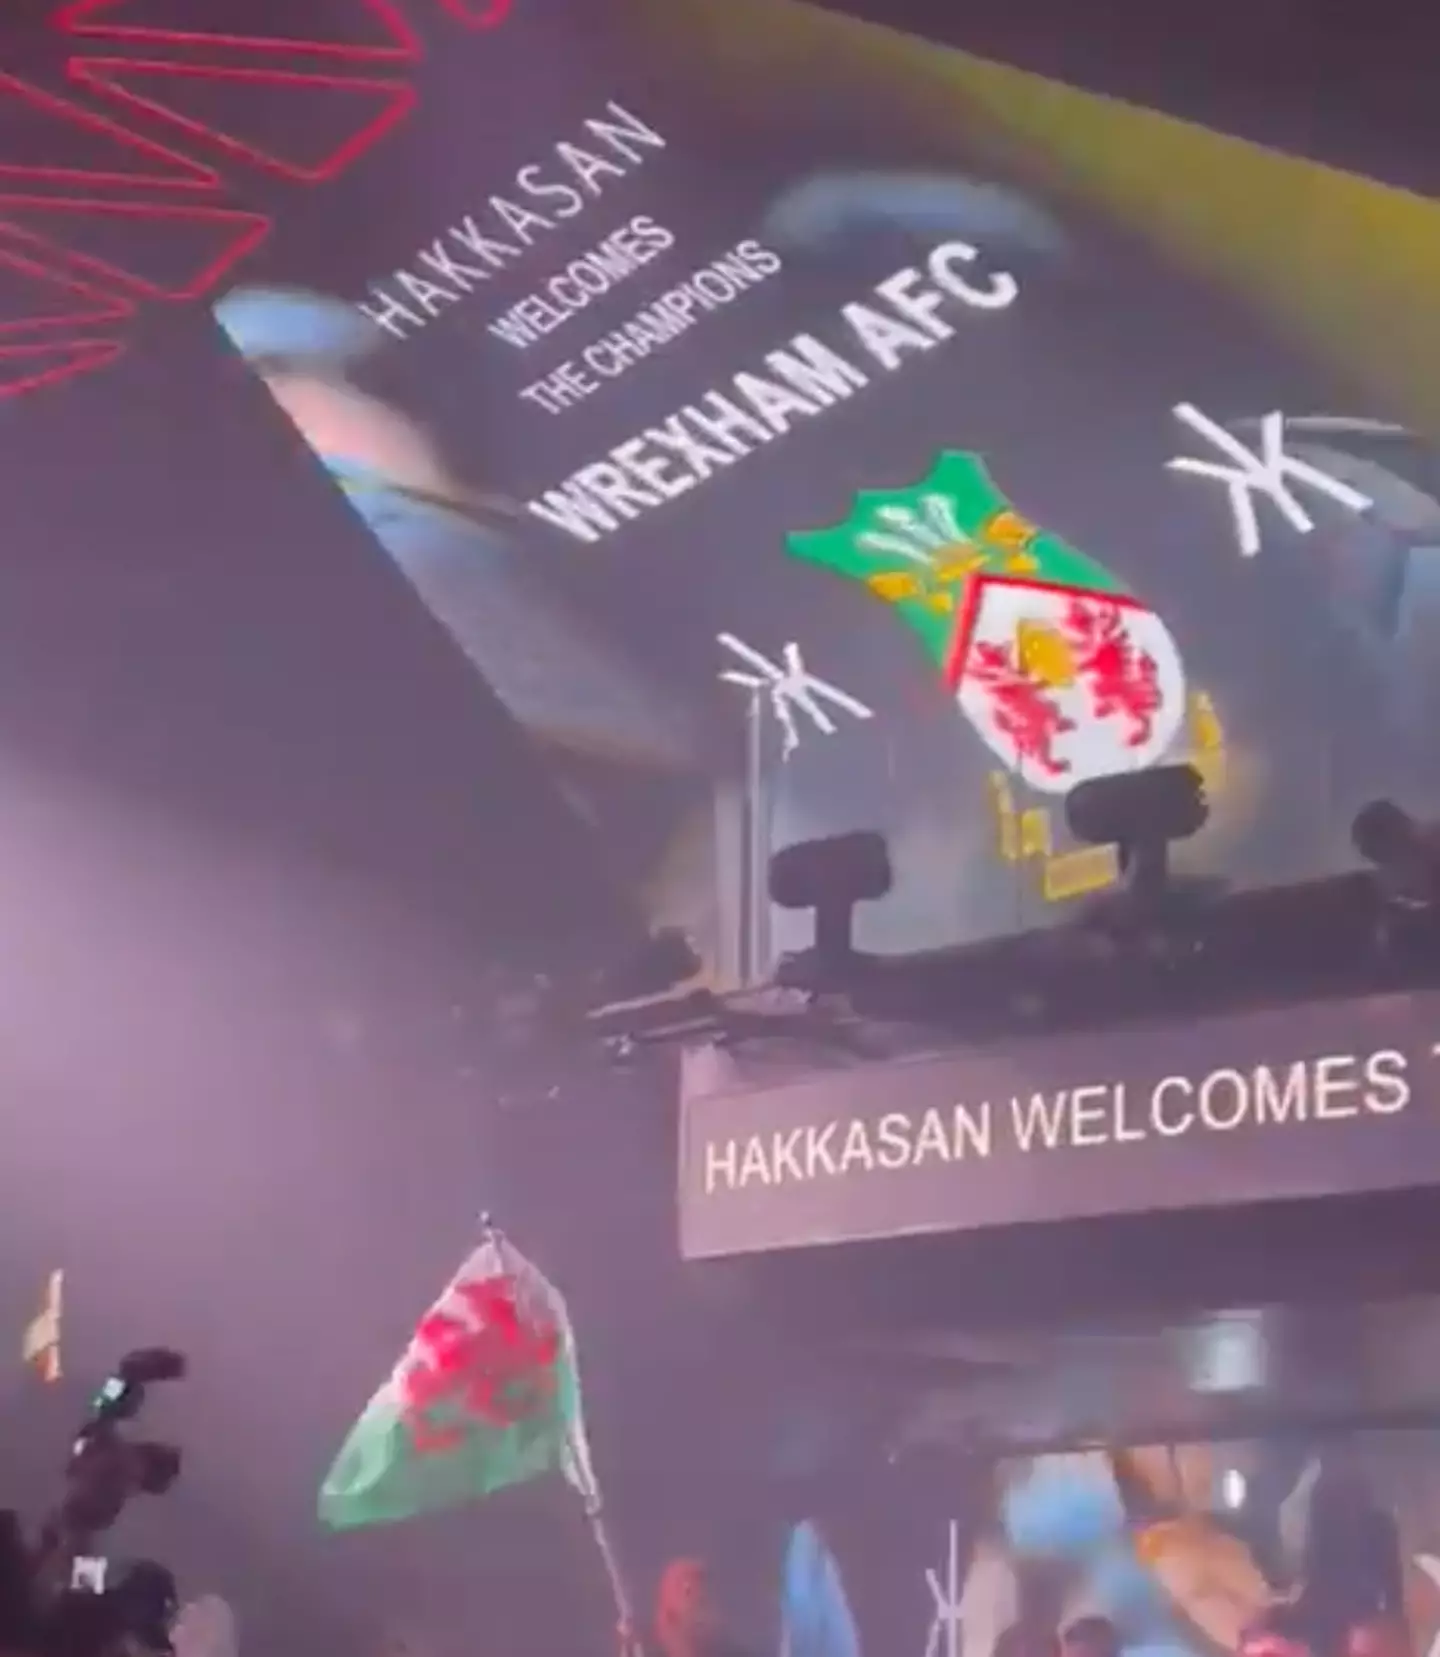 Wrexham was greeted with flags and signs at the club.